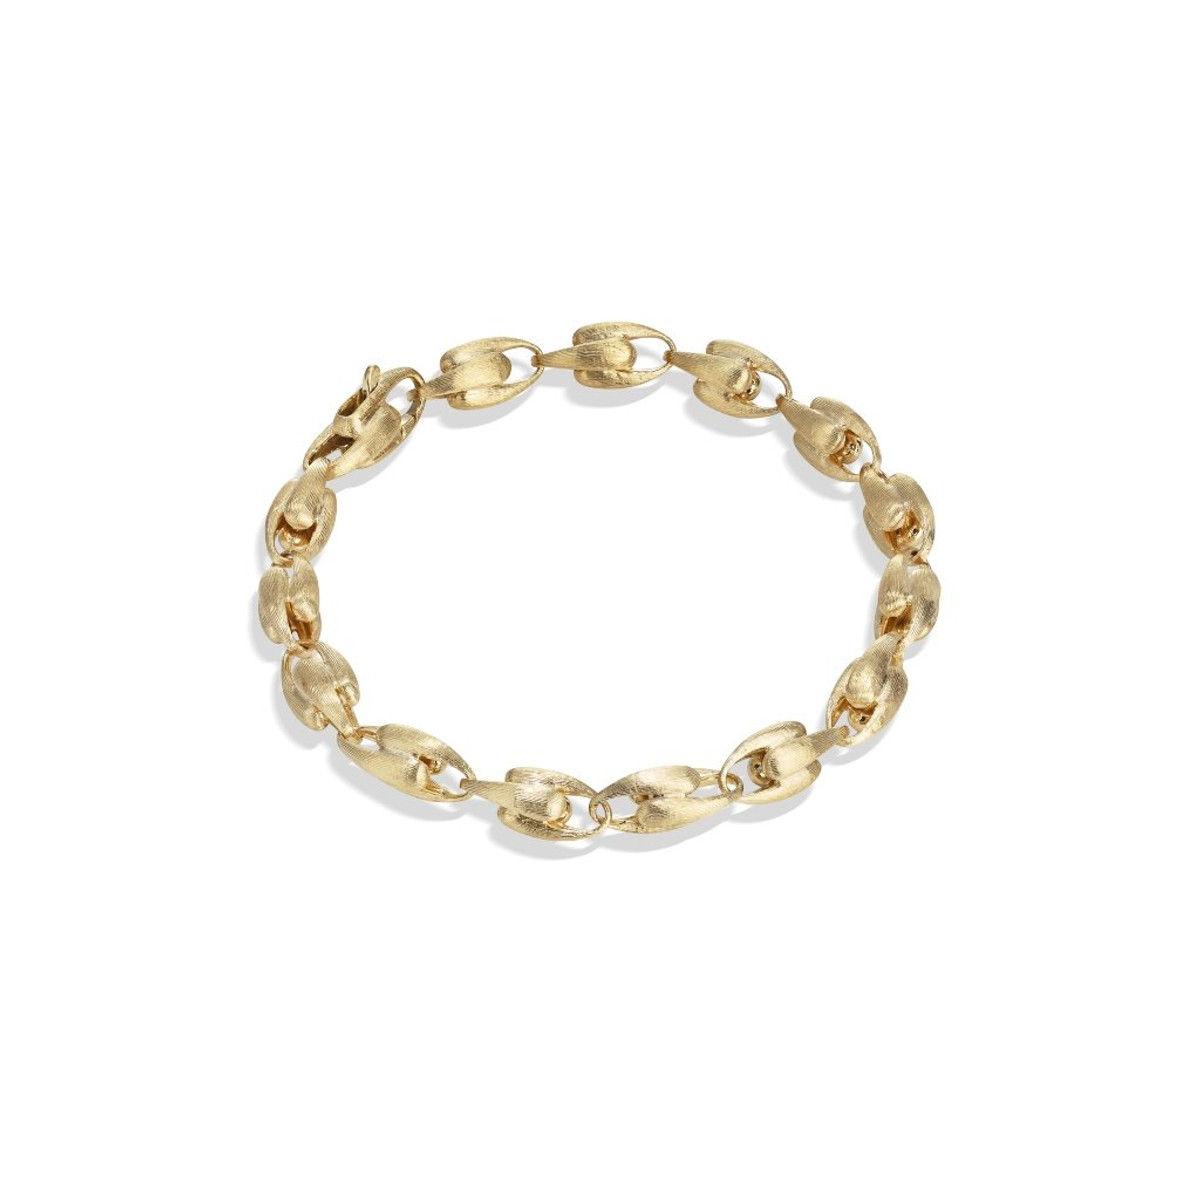 Marco Bicego 18K Yellow Gold Lucia Small Link Bracelet-34332 Product Image